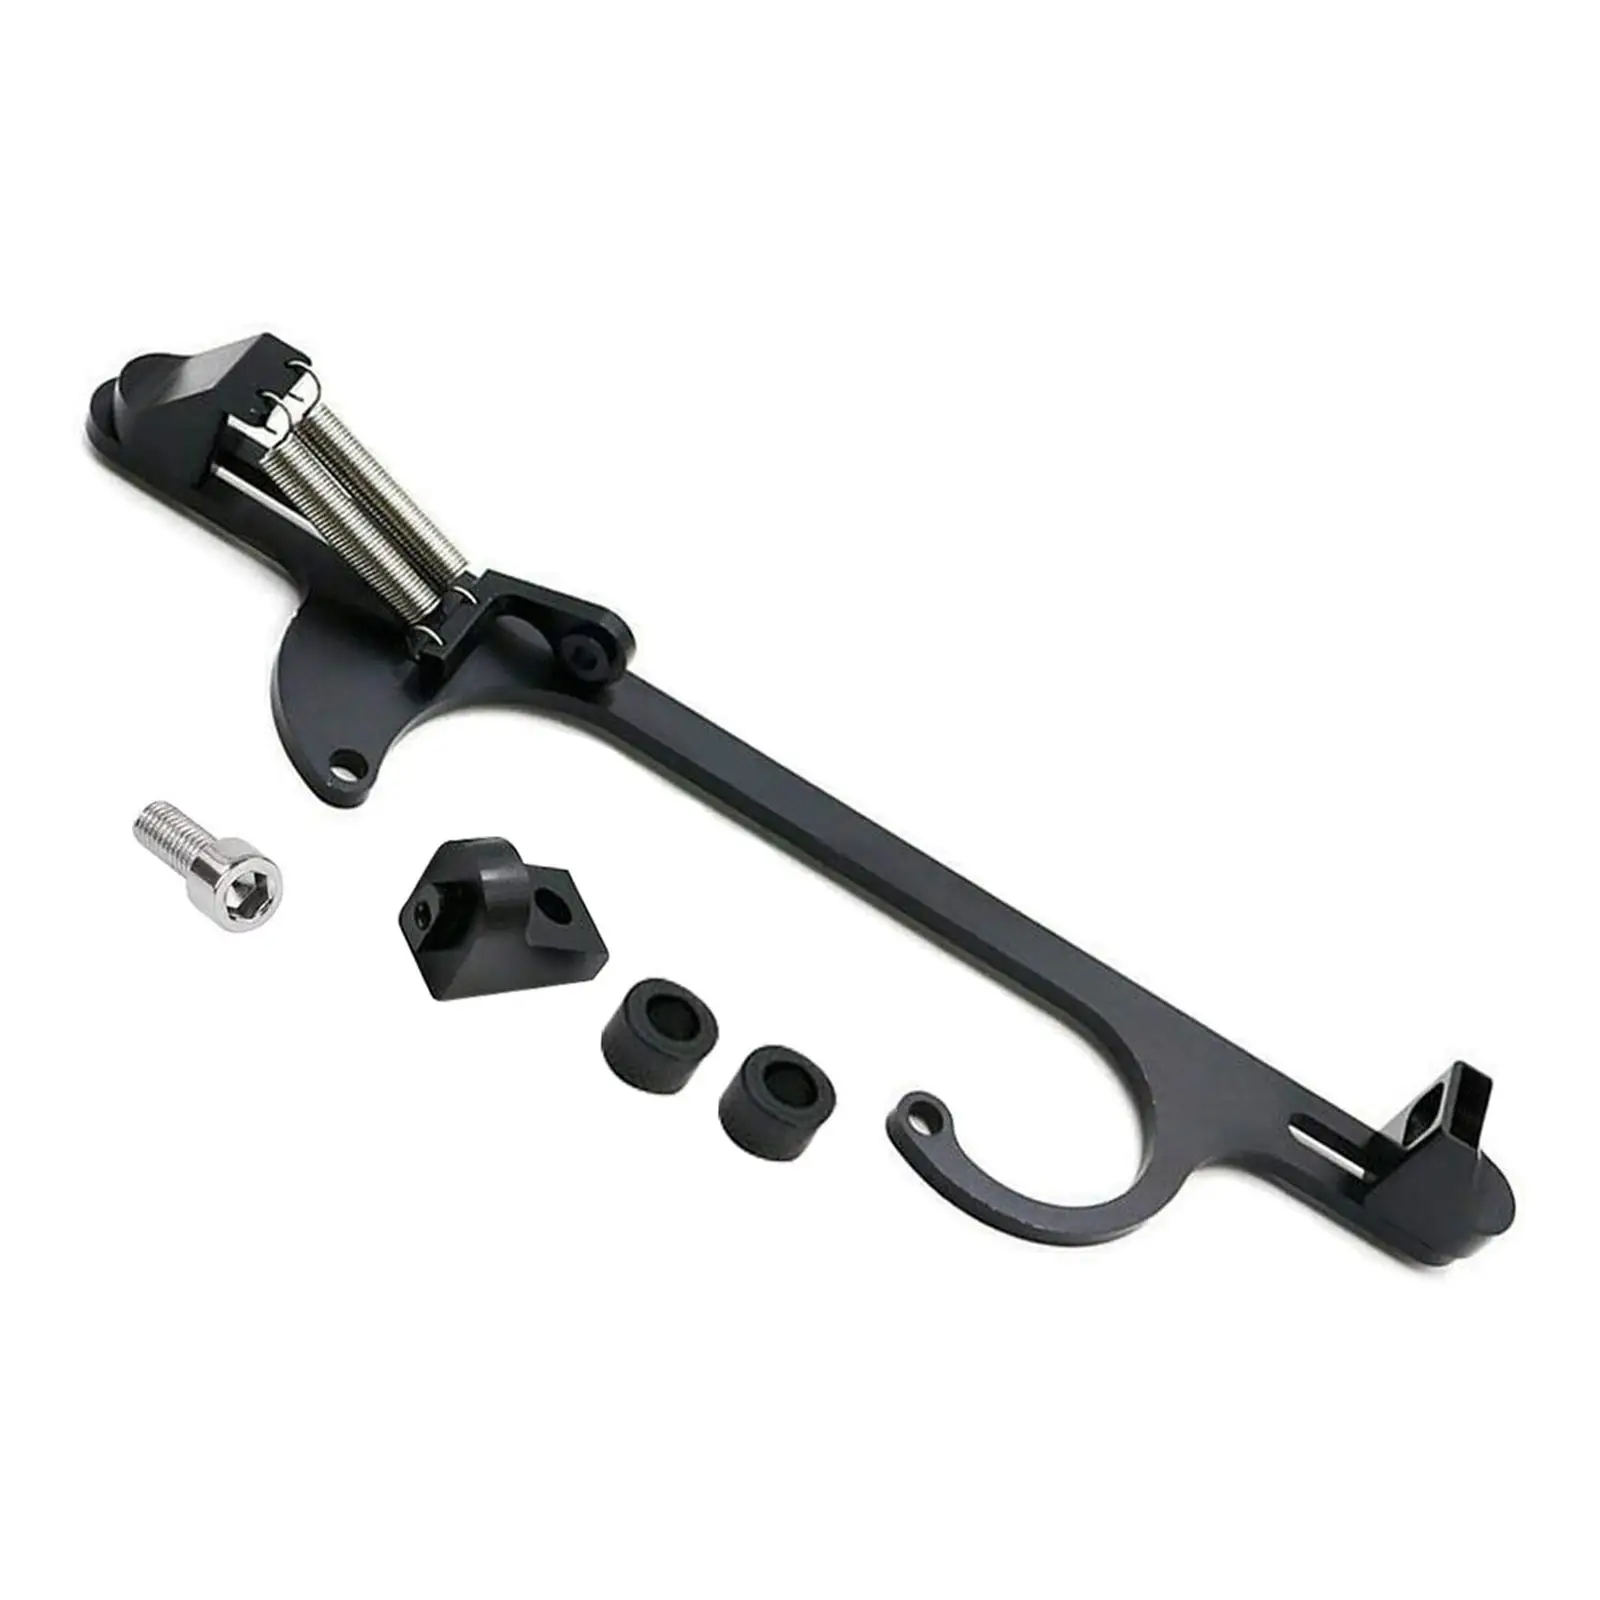 Auto Throttle Brackets 4150 4160 Replace Fuel System Aluminum Adjustable Fit for Toyota Corolla 1.6L 6.5L Carb 307 350 6.2L